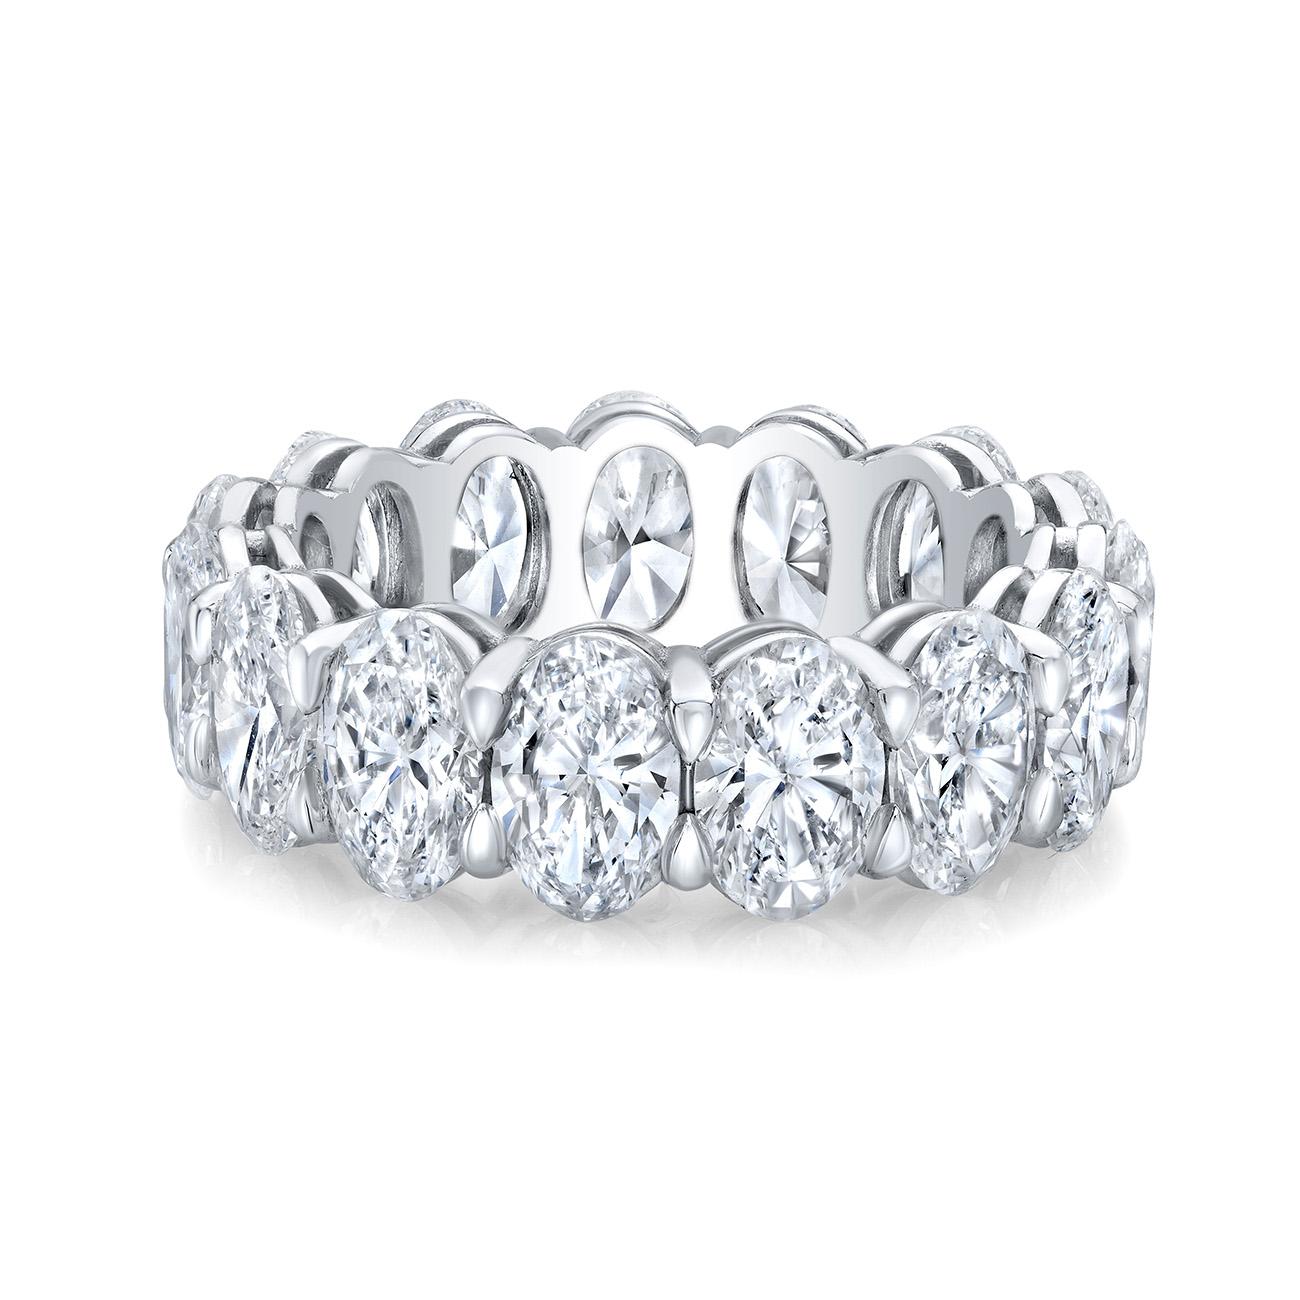 Women's Eternity Band in Platinum with Oval Cut Diamonds. D4.10ct.t.w. For Sale